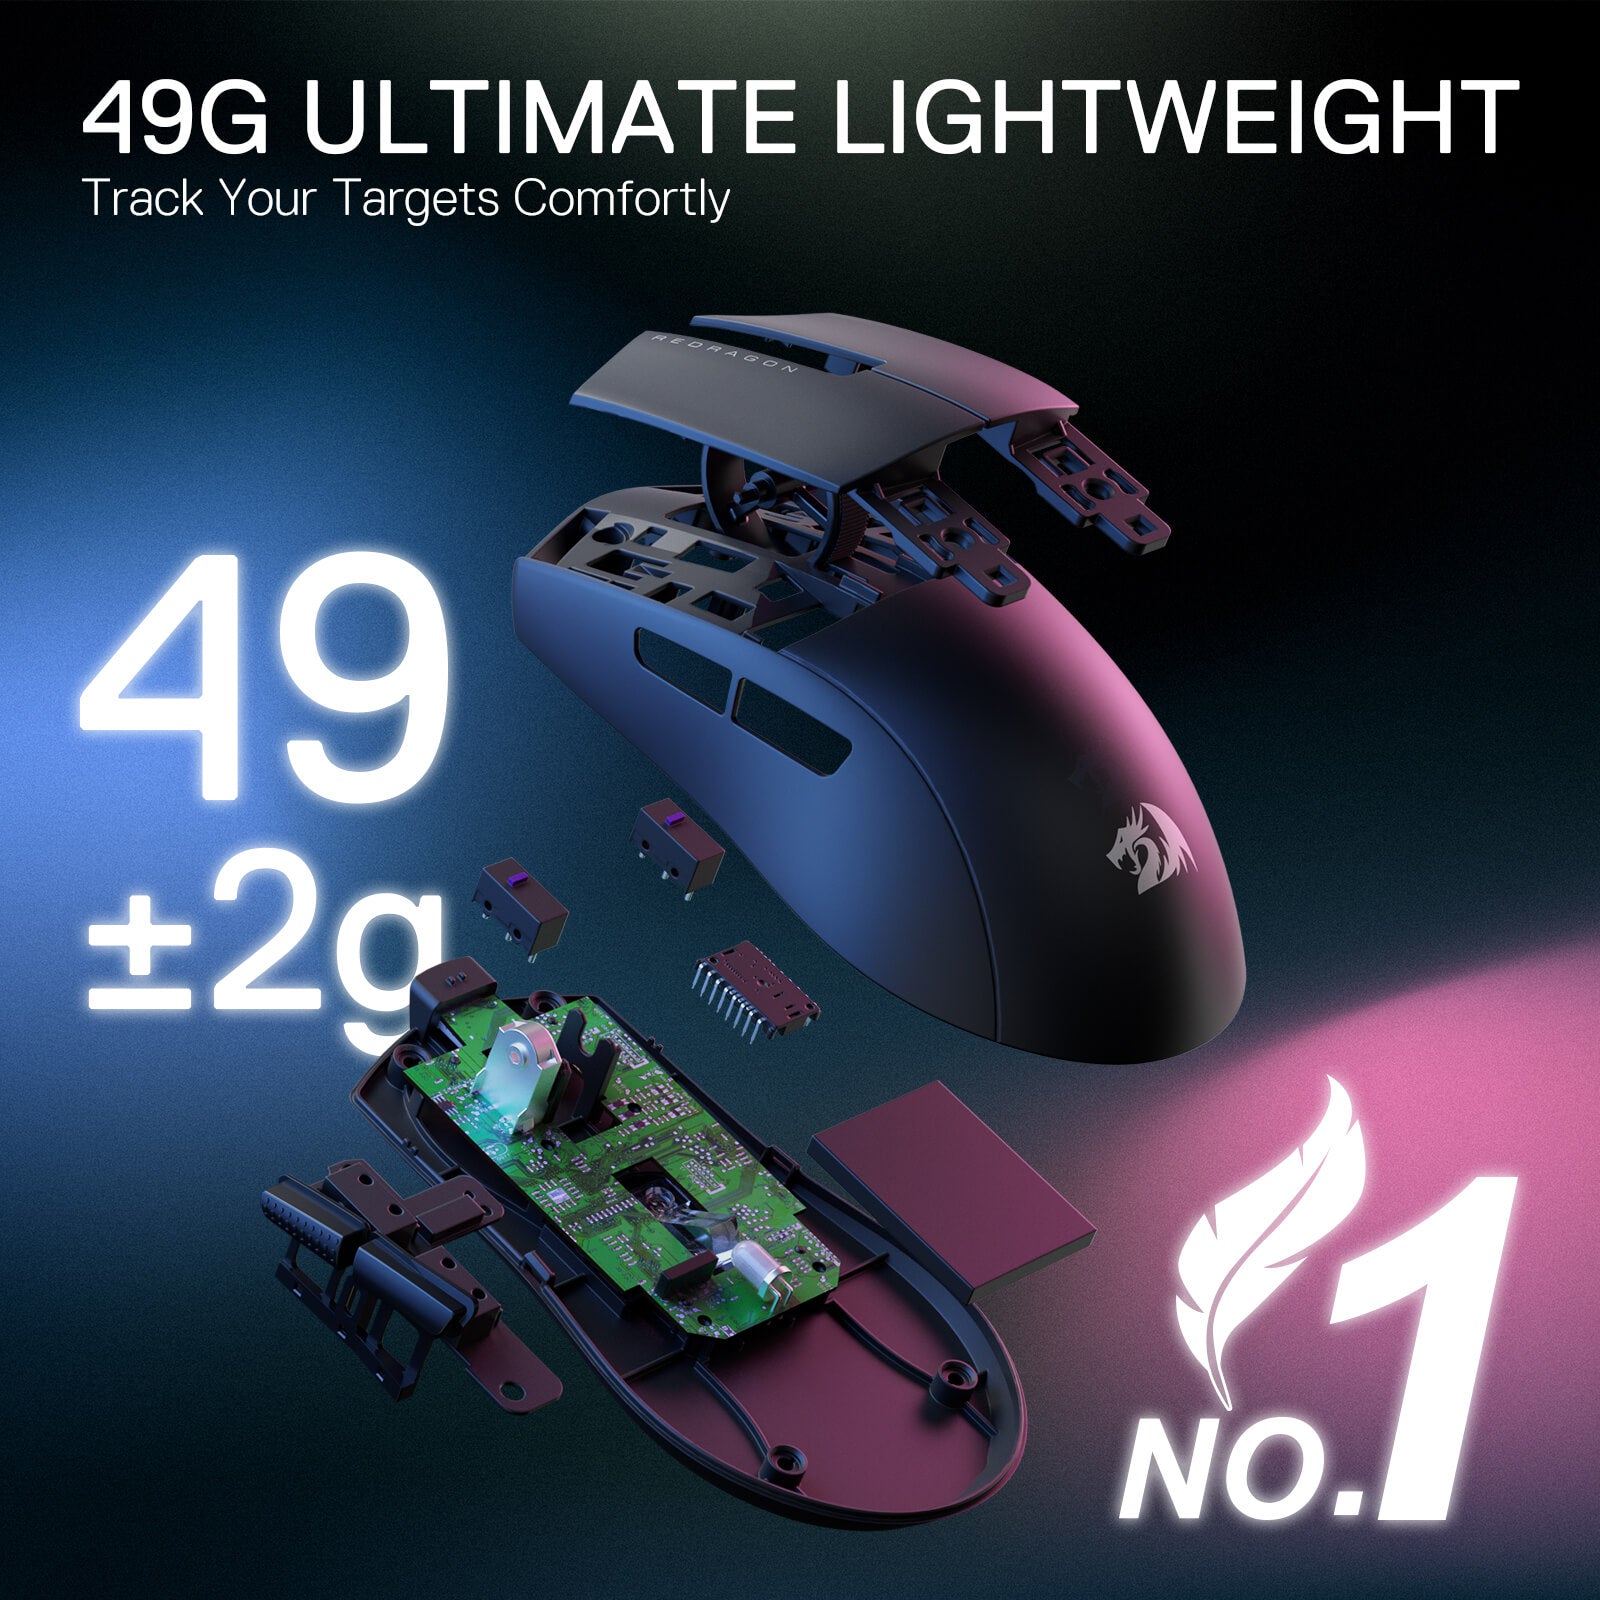 Redragon M916 Wireless Gaming Mouse, 49G Ultra-Light 8K DPI 2.4G Wireless Gaming Mouse w/Ergonomic Natural Grip Build, Full Programmable Buttons, Software Supports DIY Keybinds & DPI